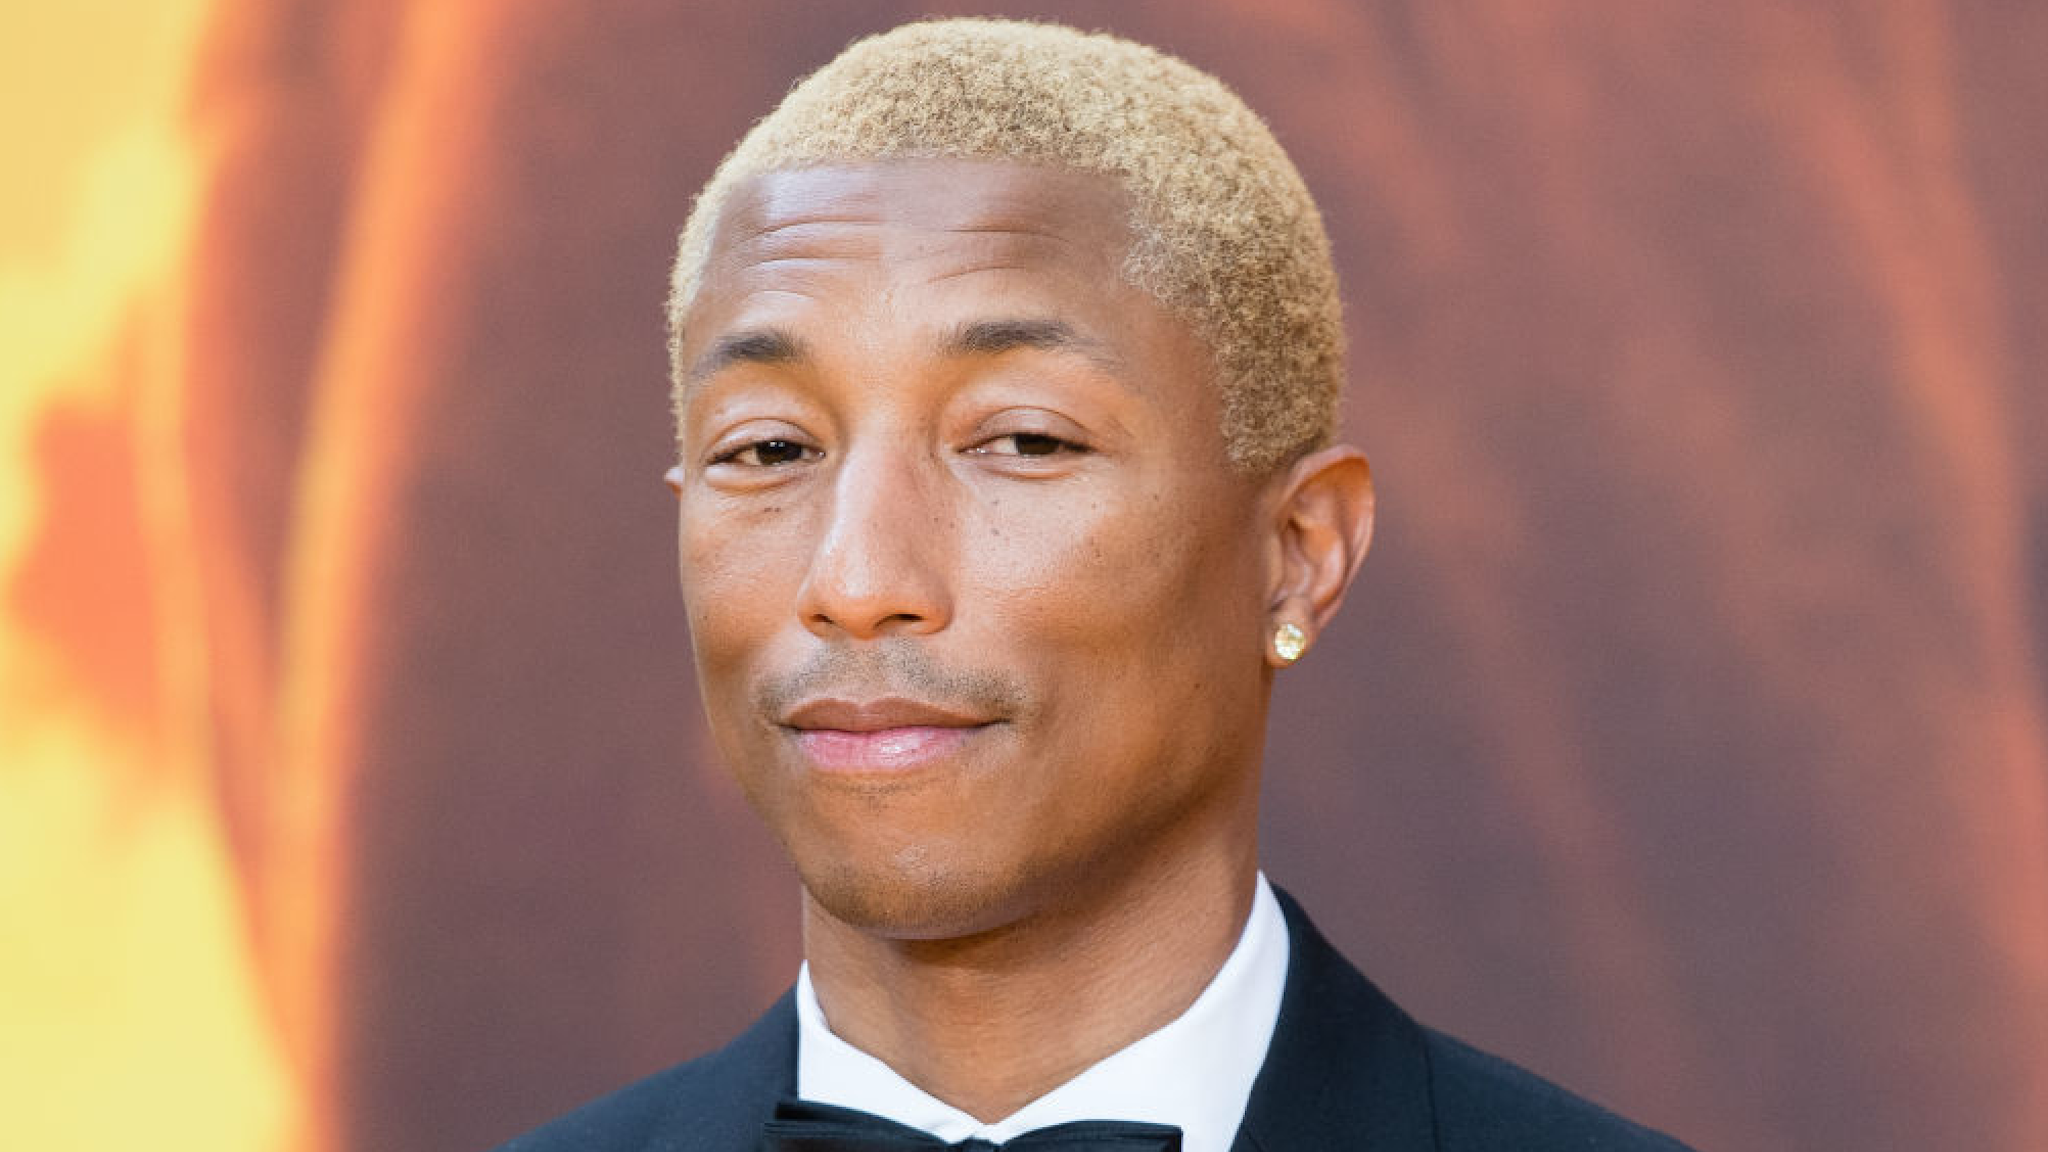 Pharrell WIlliams attends "The Lion King" European Premiere at Leicester Square on July 14, 2019 in London, England.